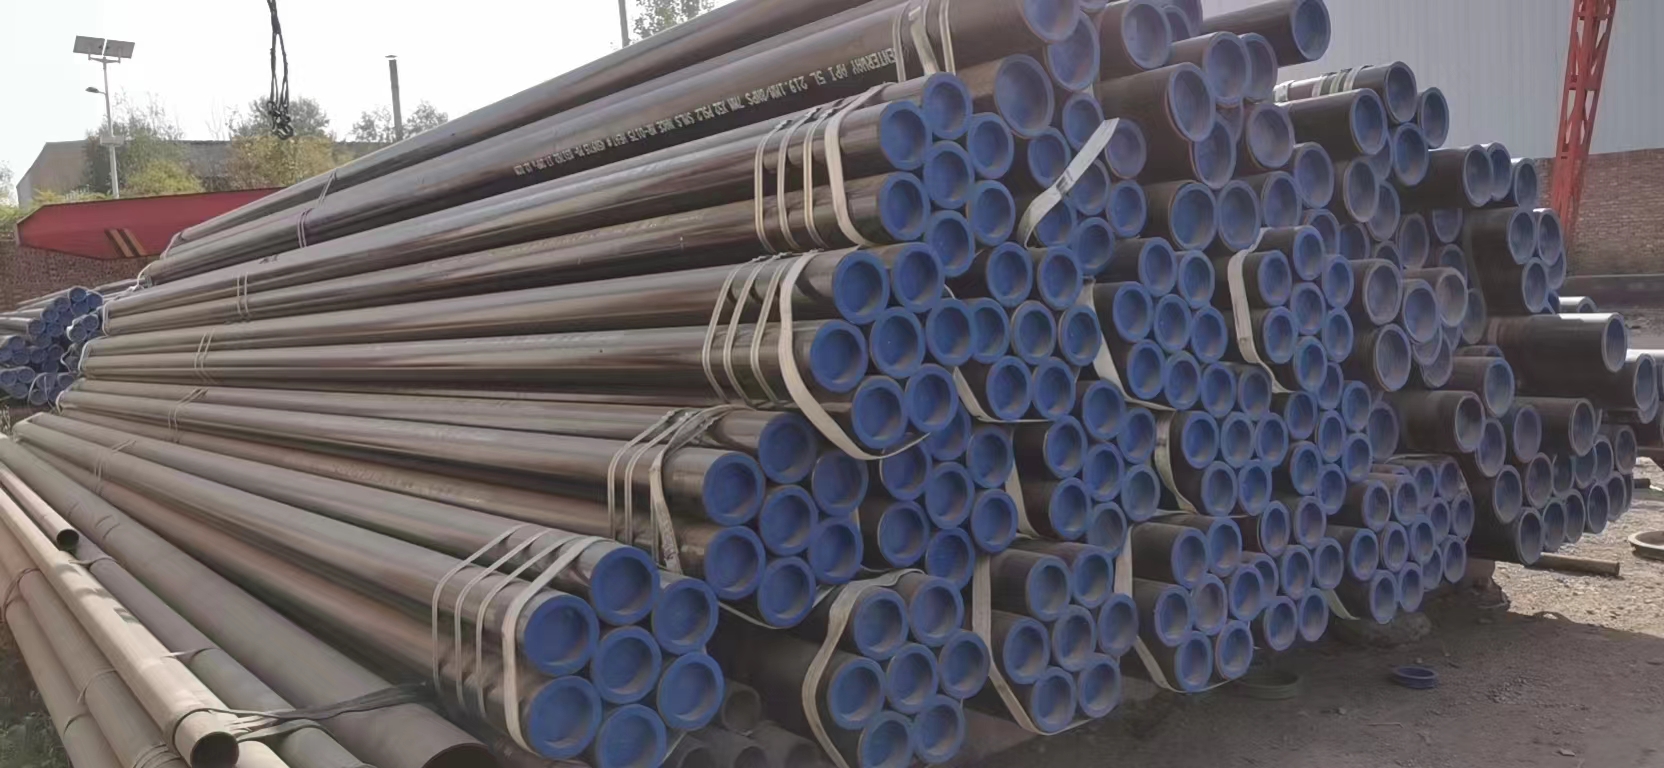 Steel pipes and fittings